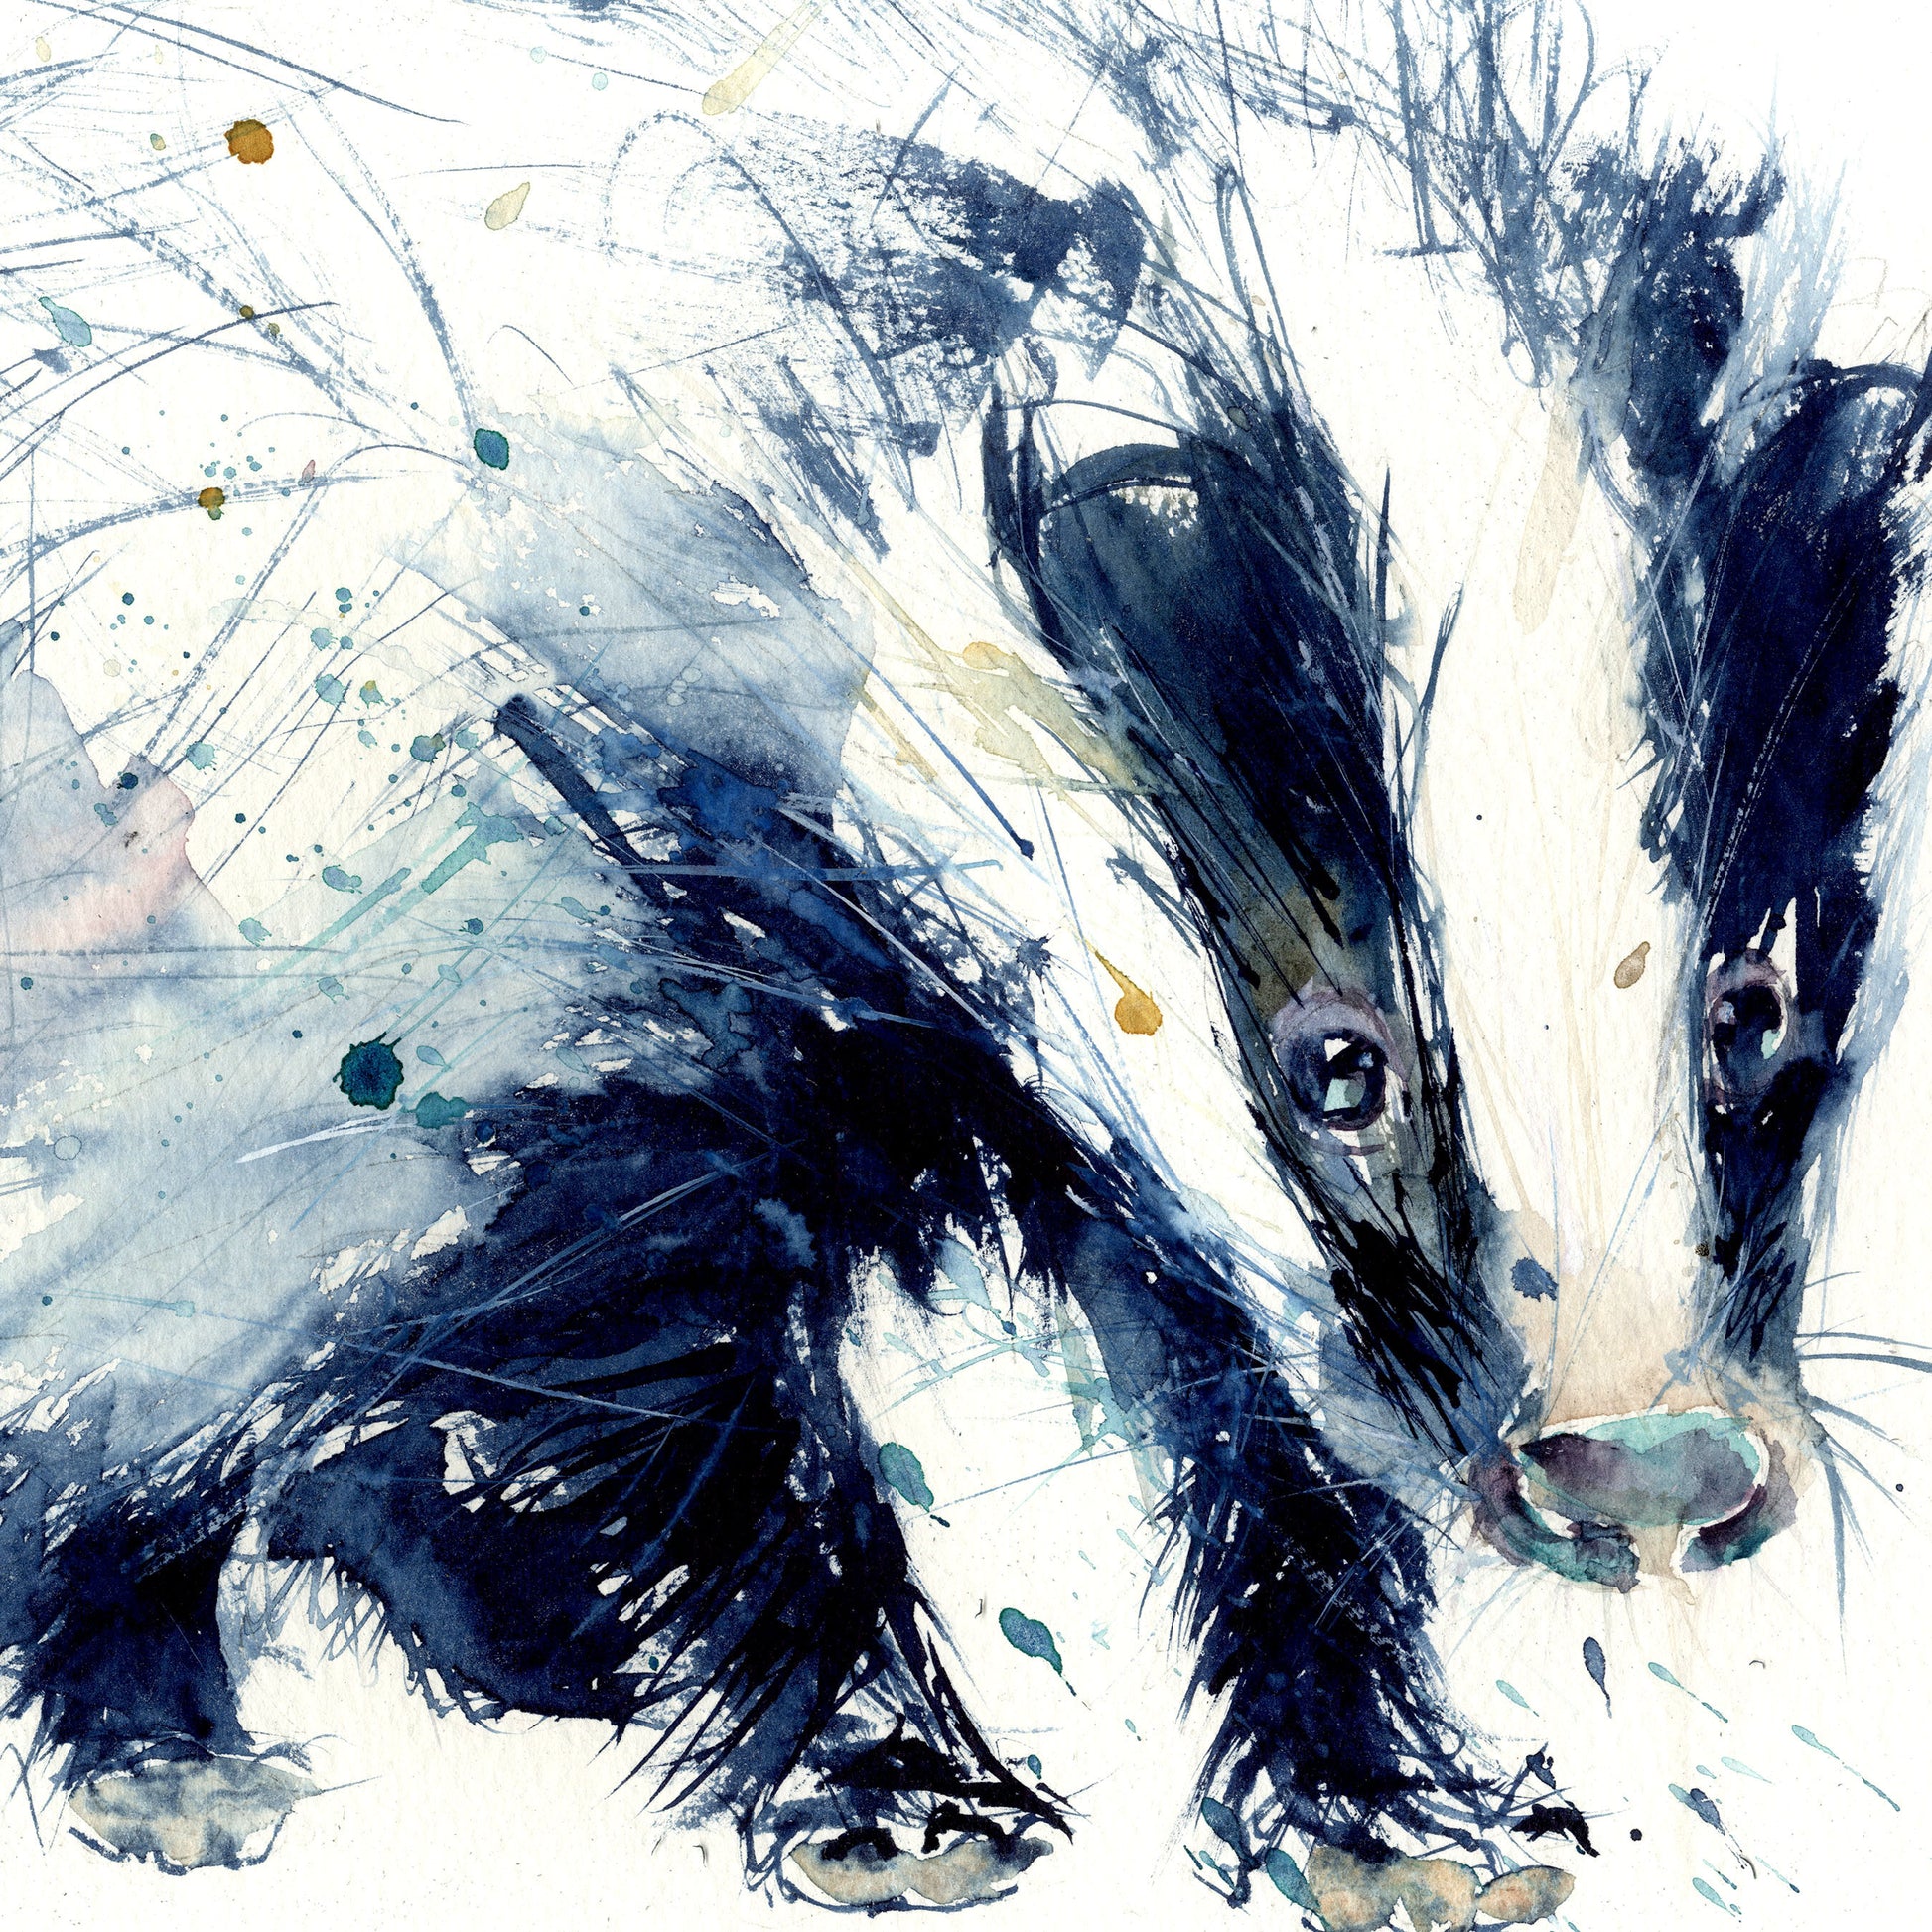 signed and numbered limited edition print from original watercolour - Badger - Jen Buckley Art limited edition animal art prints